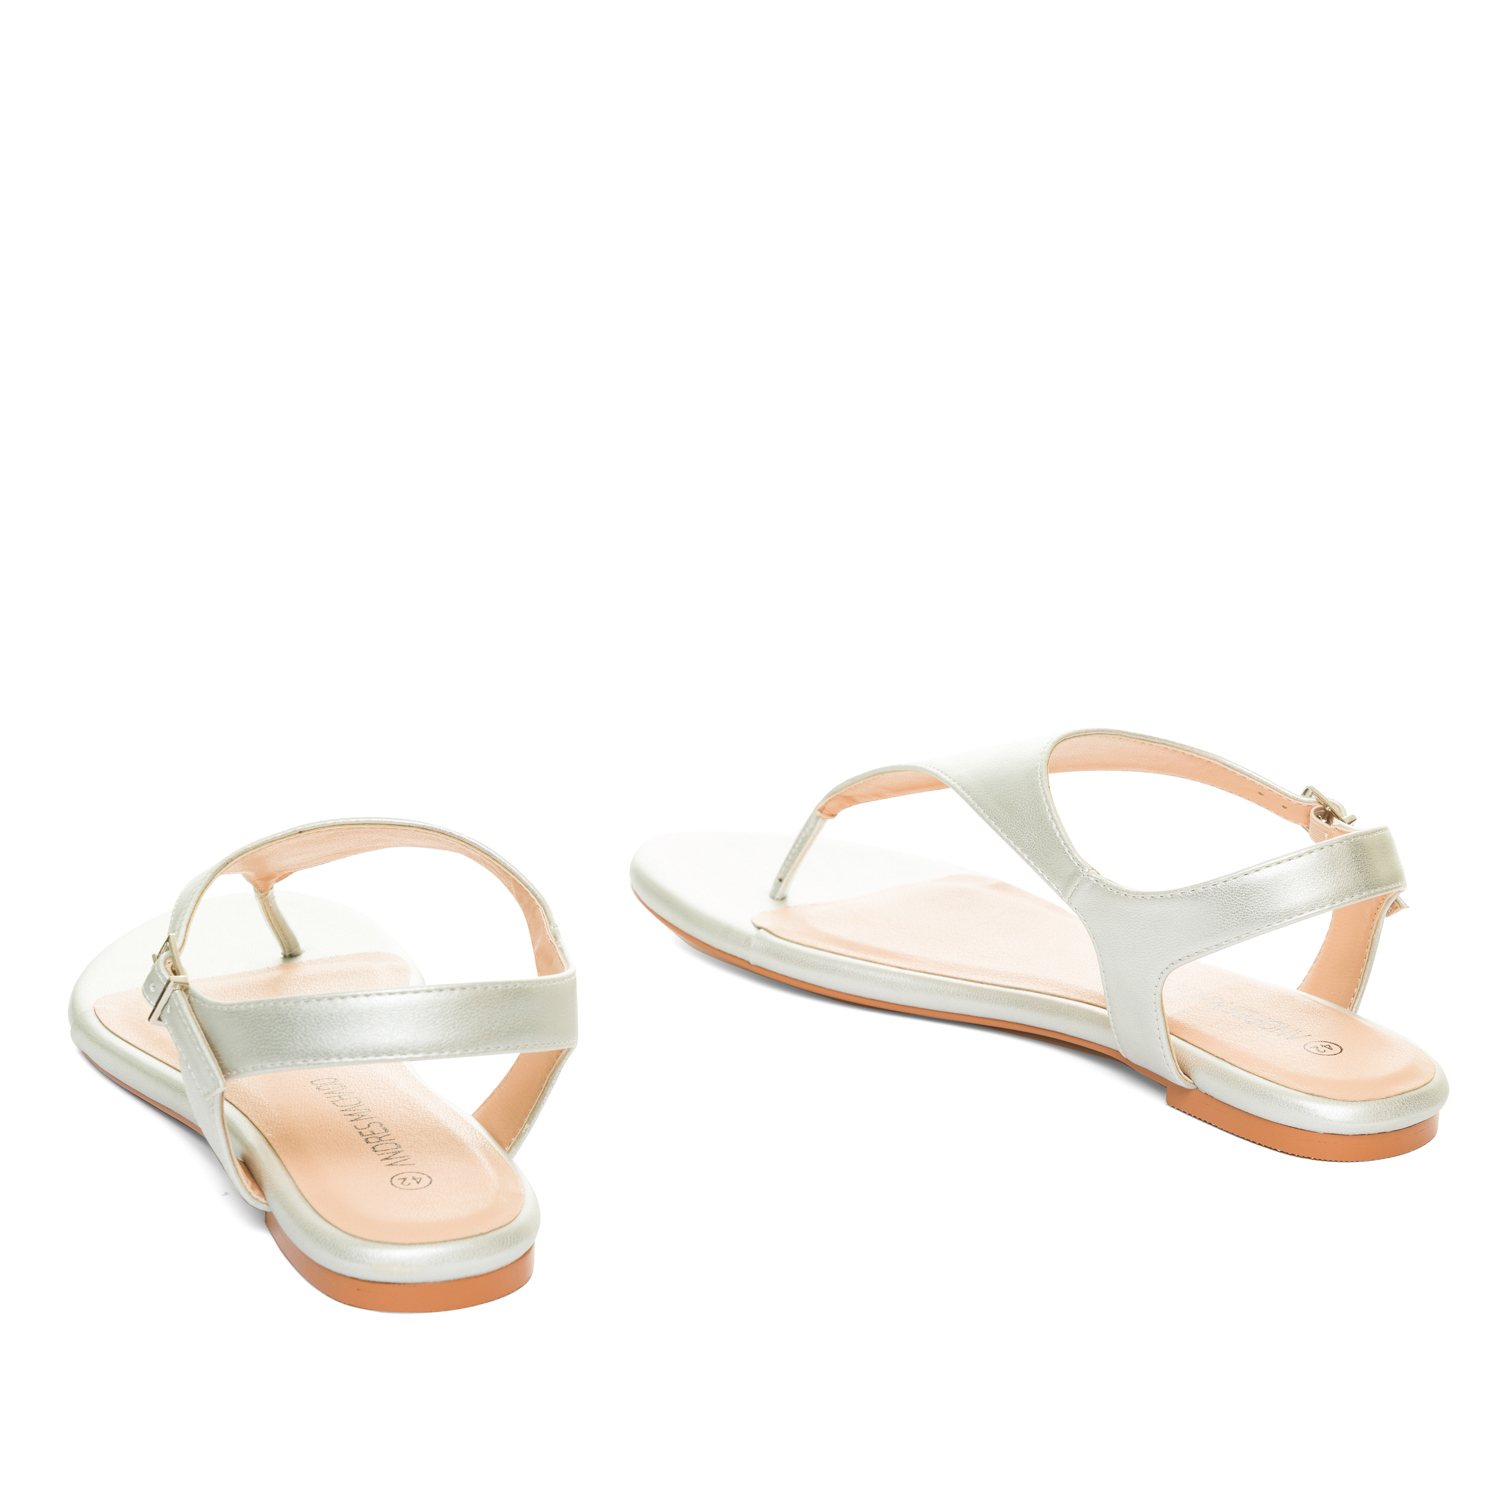 Silver faux leather flat sandals 